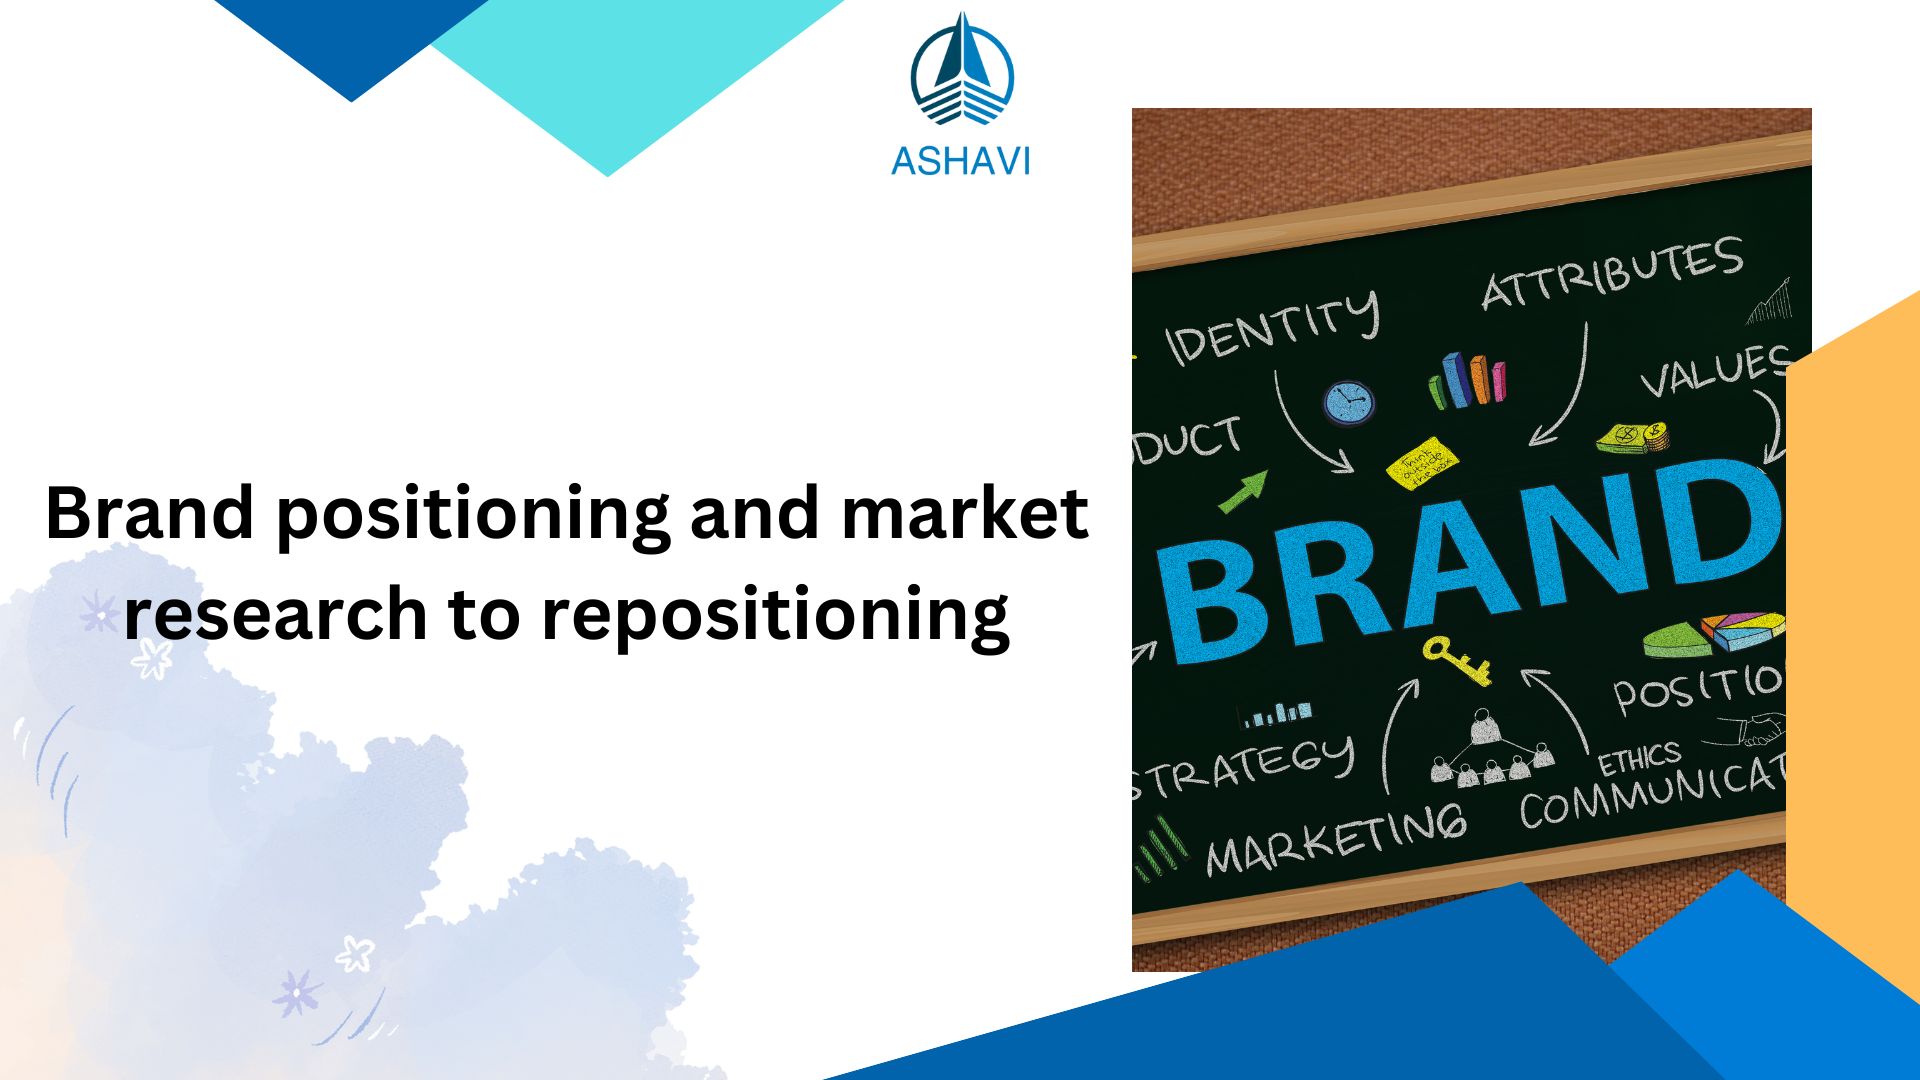 Brand positioning and market research to repositioning